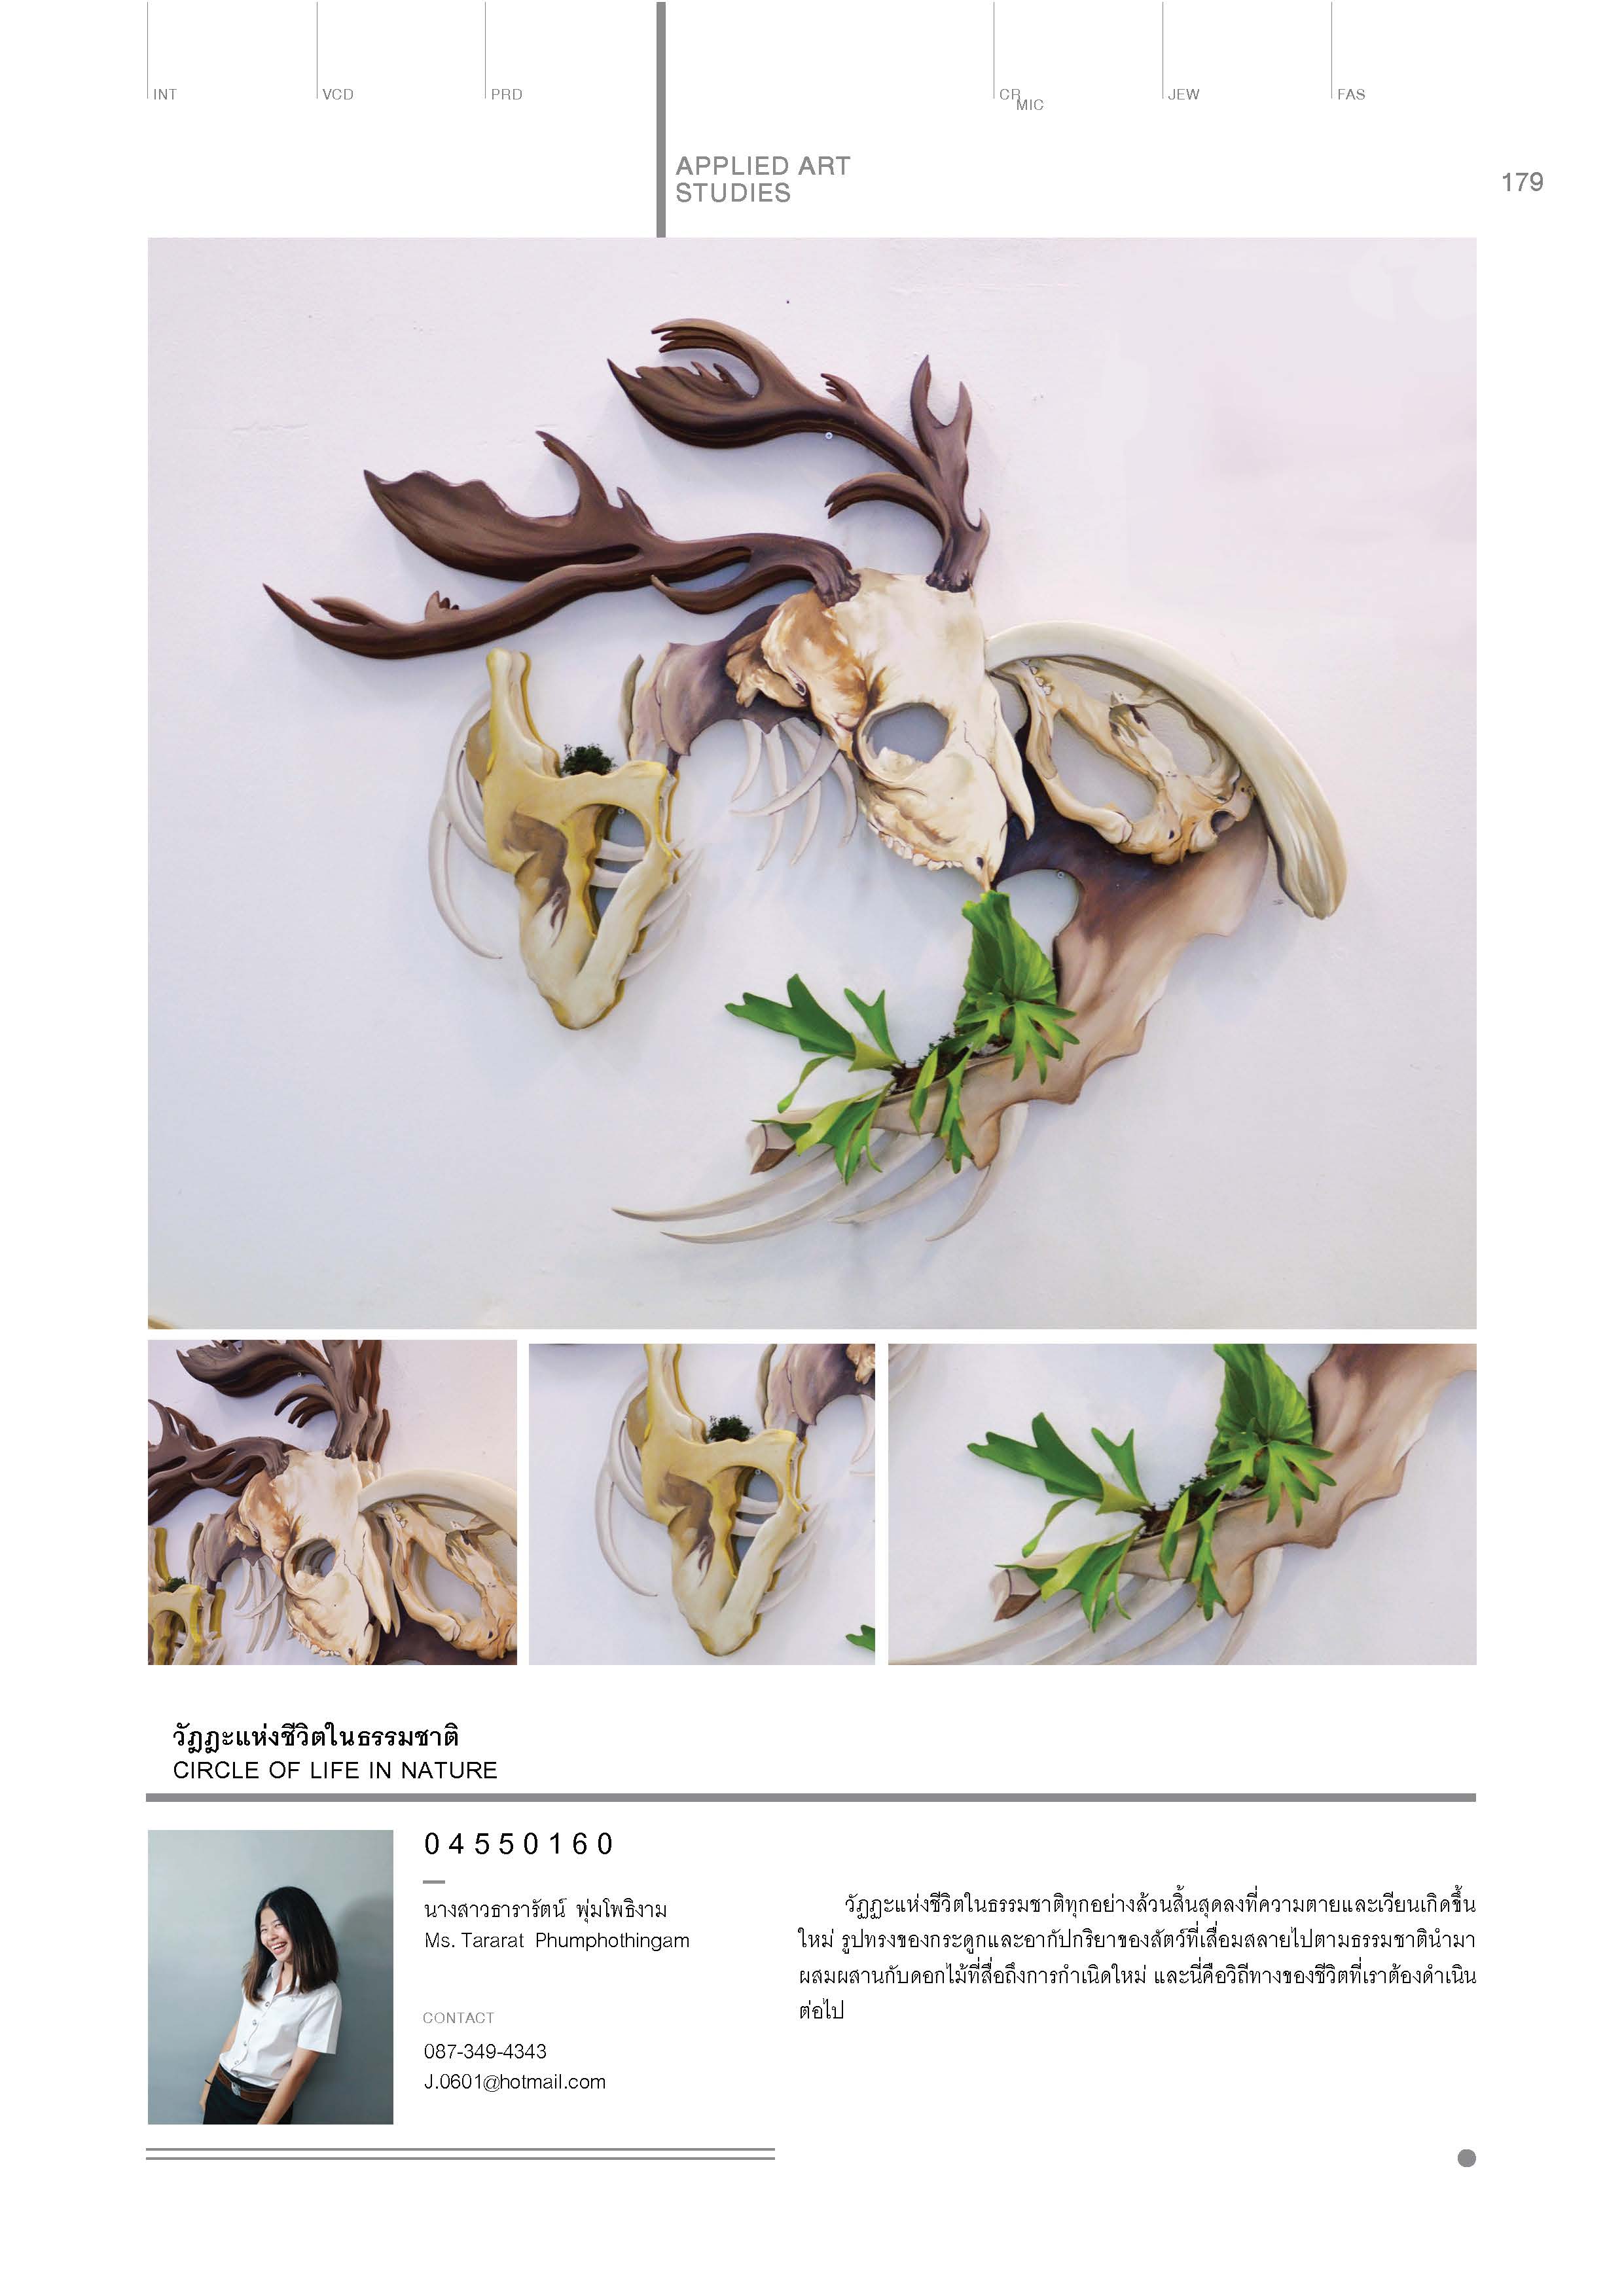 Photosynthesis-The46th_Art_Thesis_Exhibition_Decorative_Arts_Page_199